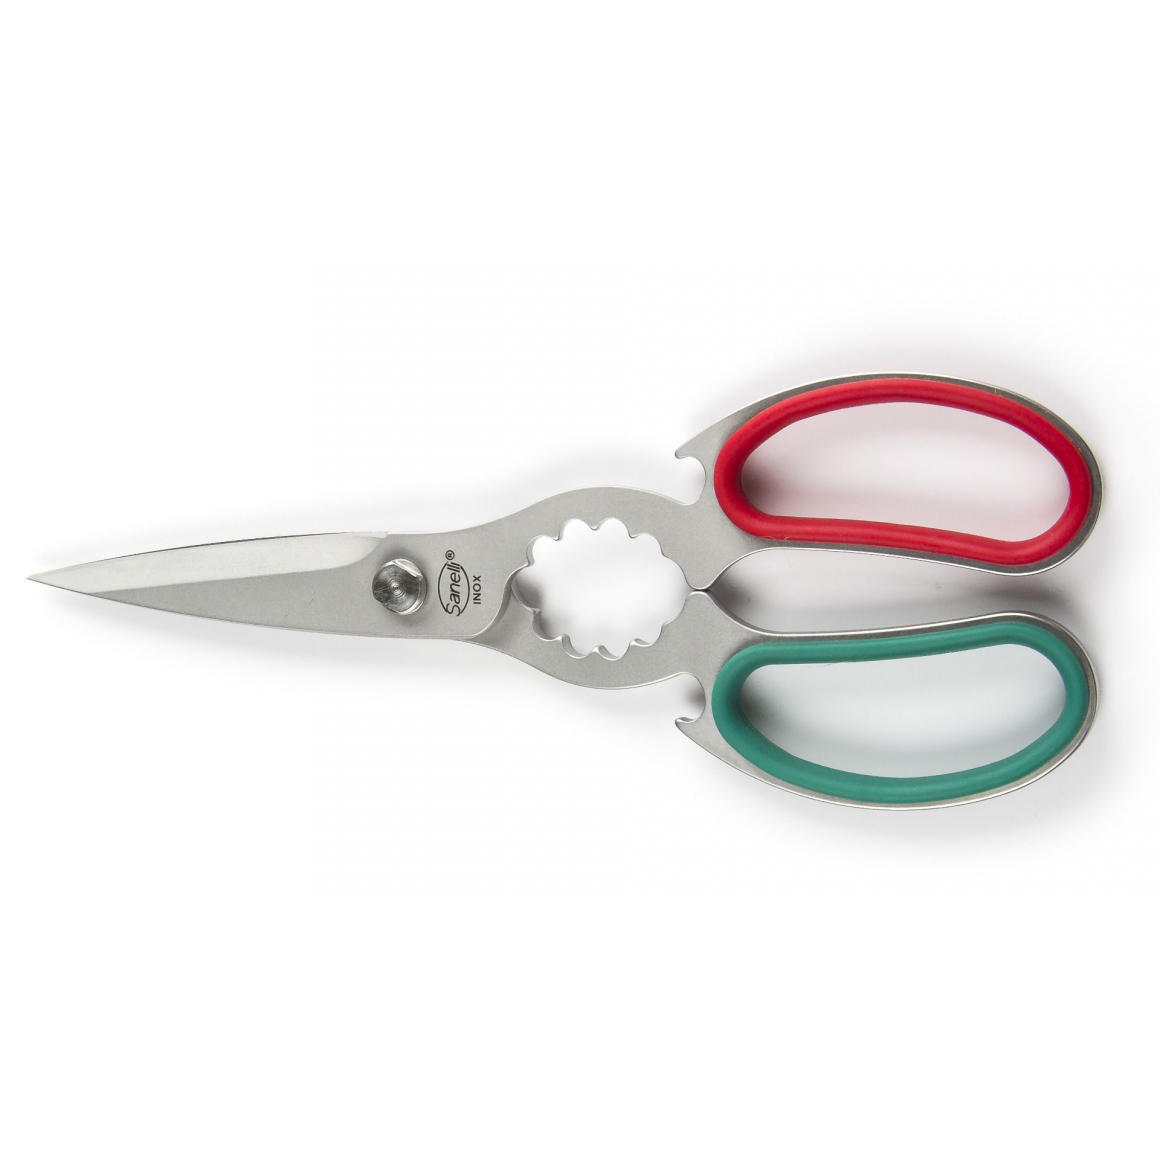 Kitchen scissors red handle, stainless steel/L21